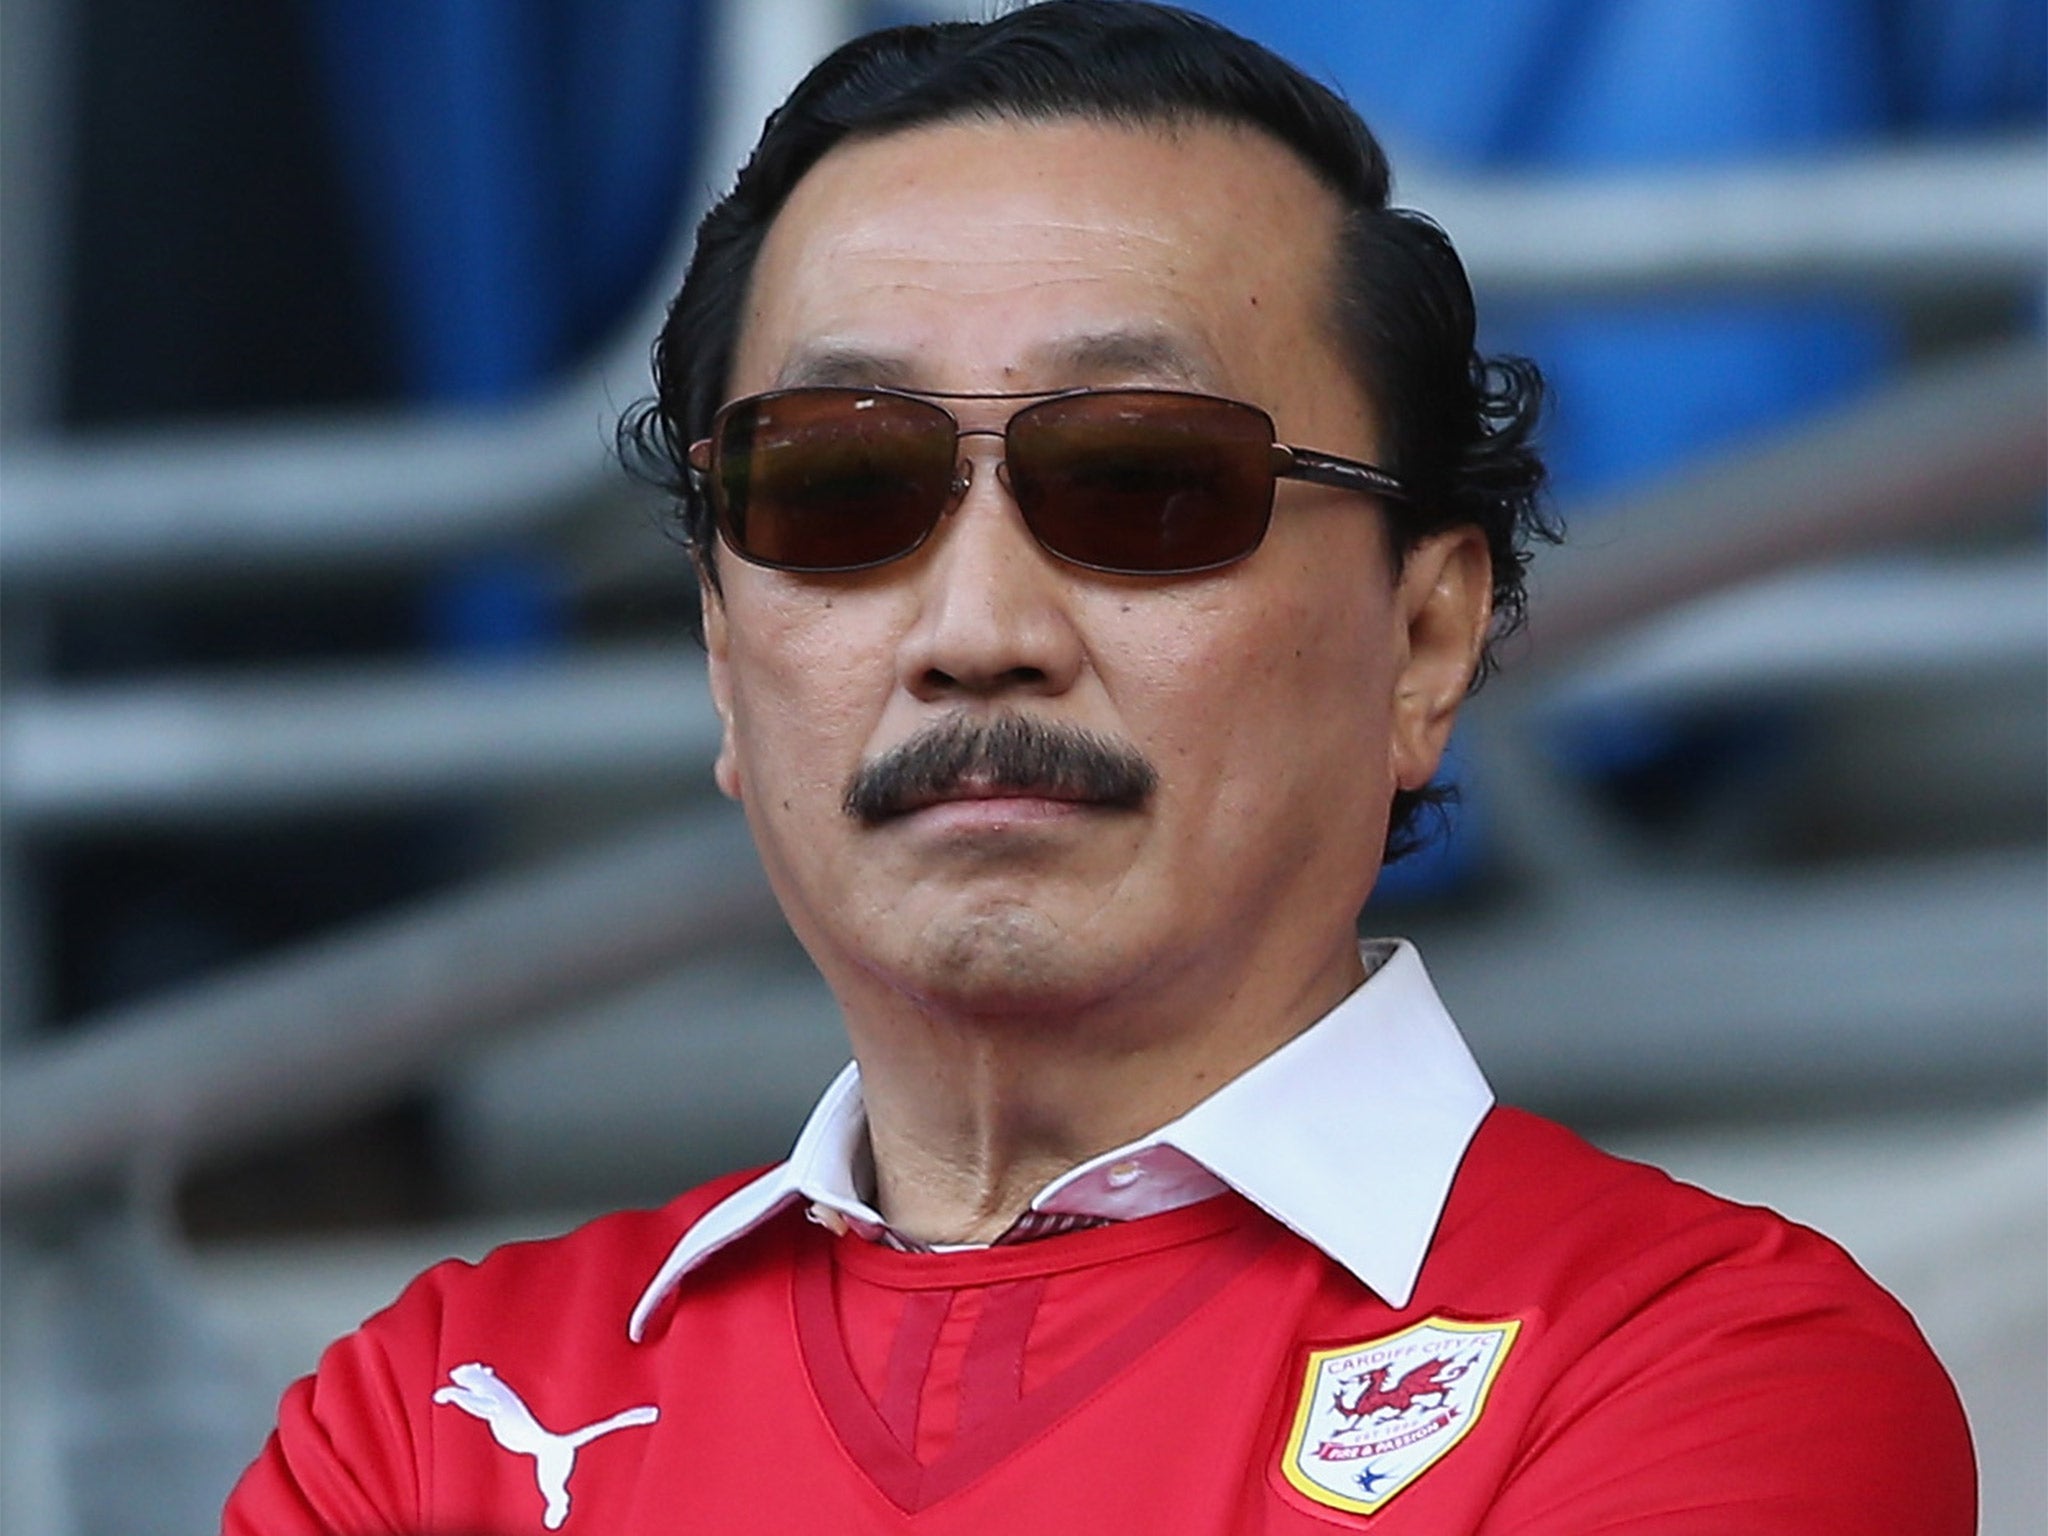 Cardiff owner Vincent Tan presented a dossier of evidence to the FA over Mackay’s messages